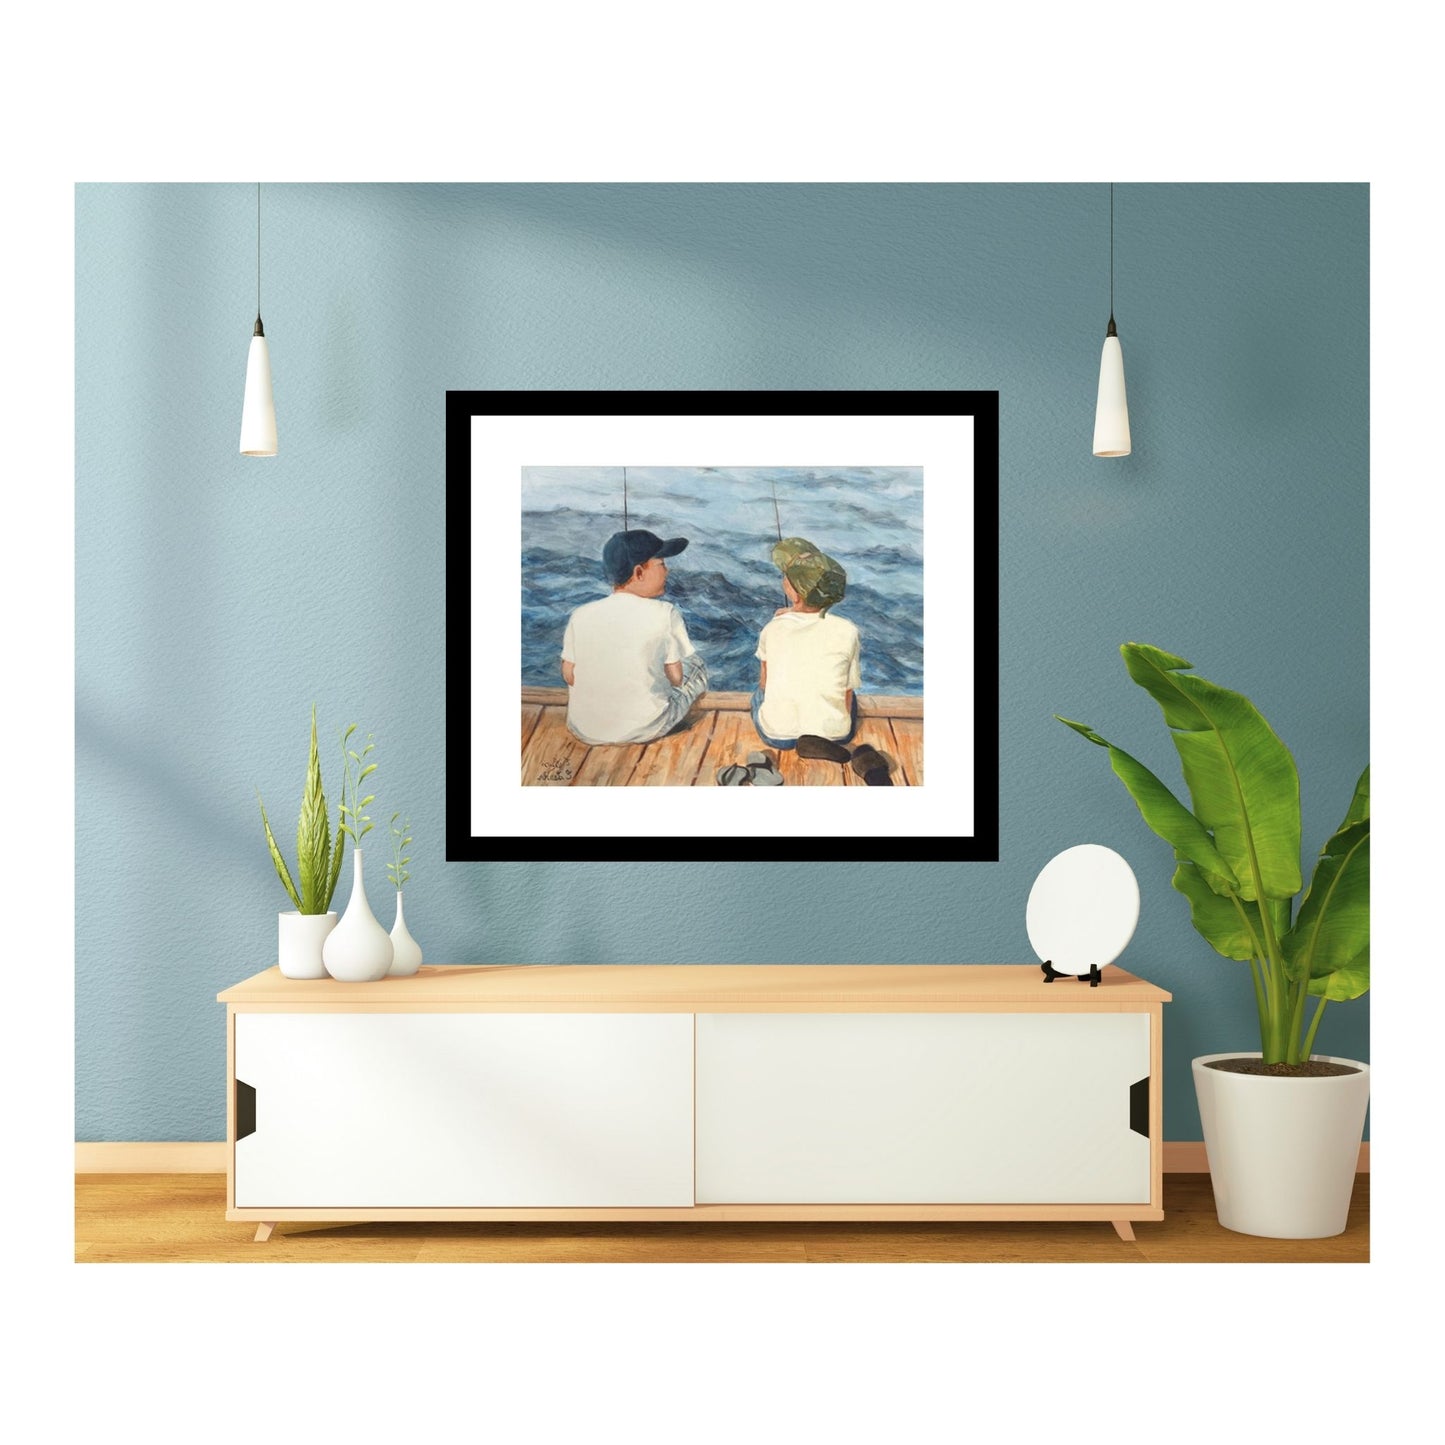 two boys fishing print with a black frame above a white credenza on a blue wall